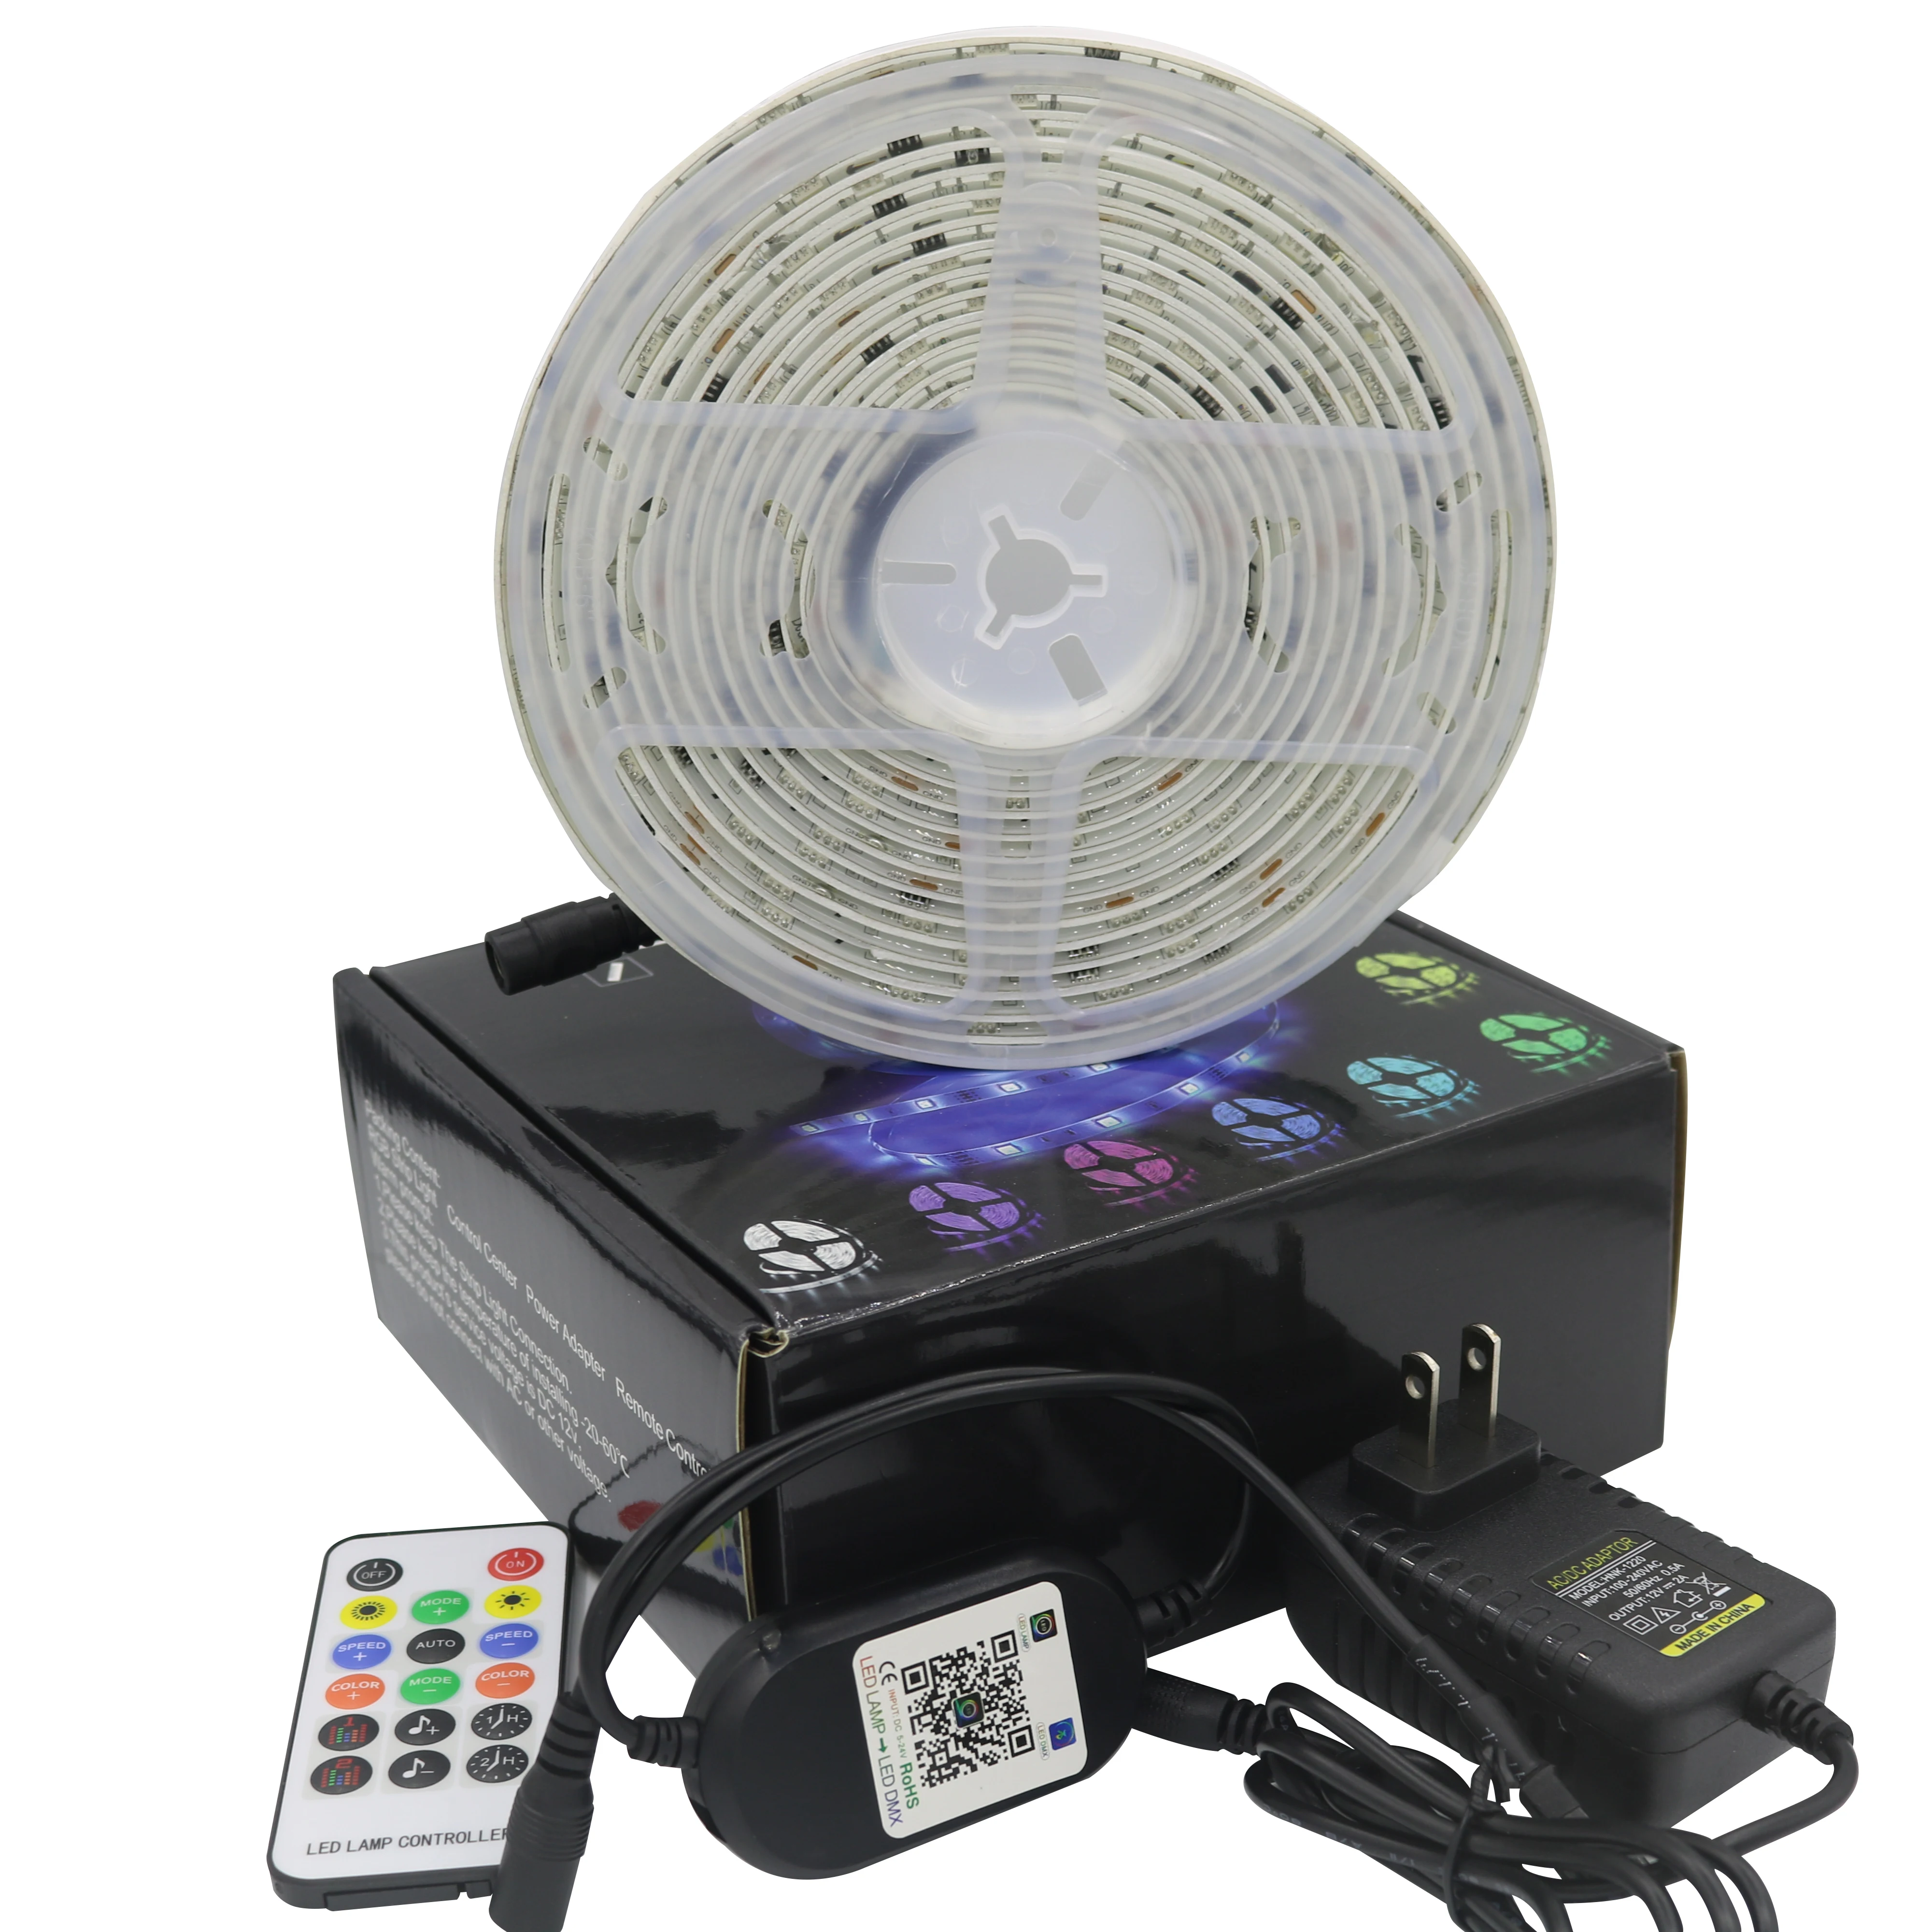 New hot selling products led strip light 2812 rgb products imported from china wholesale